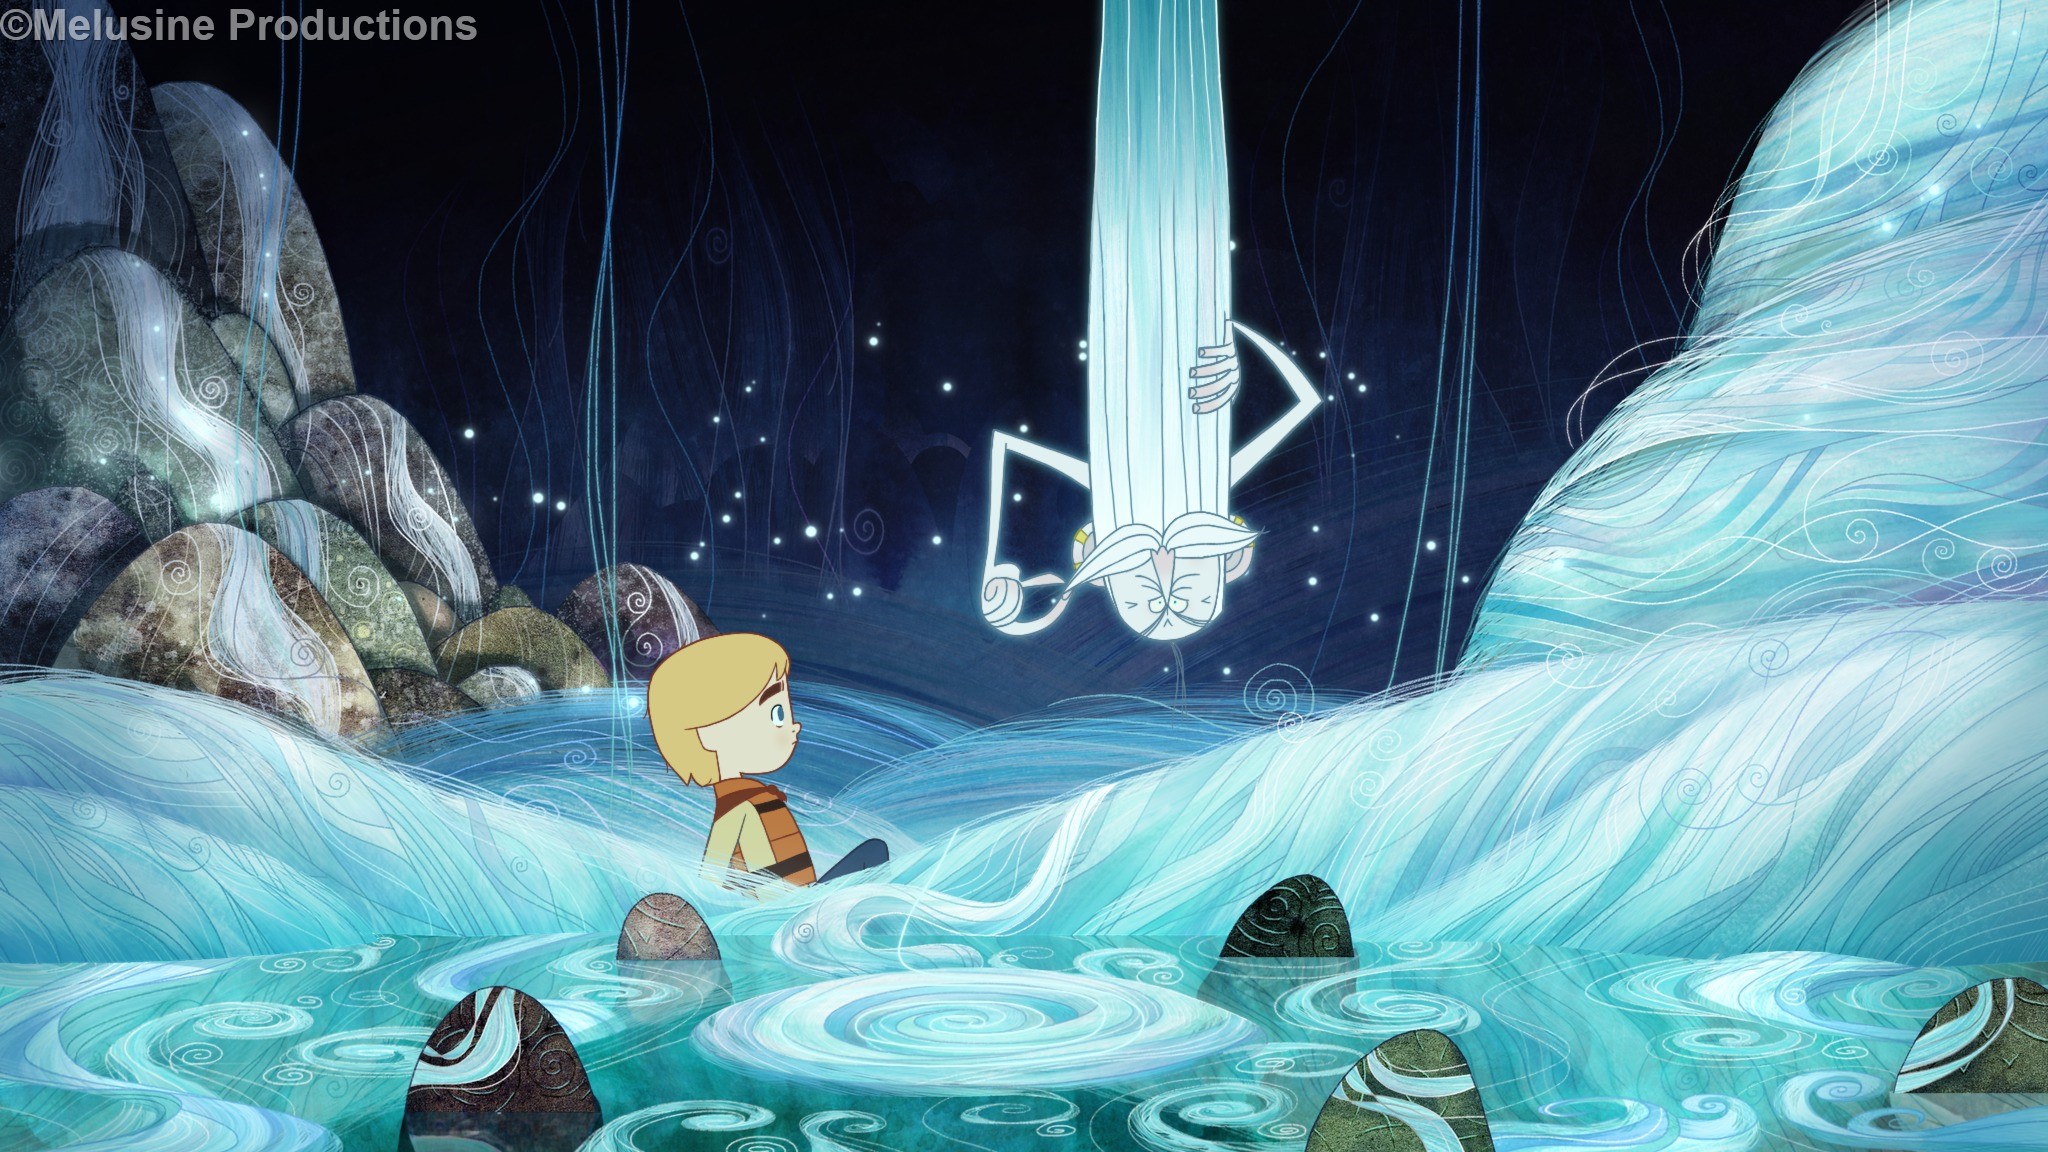 Song of the sea au 27e Festival du Film de Galway, Song of the sea